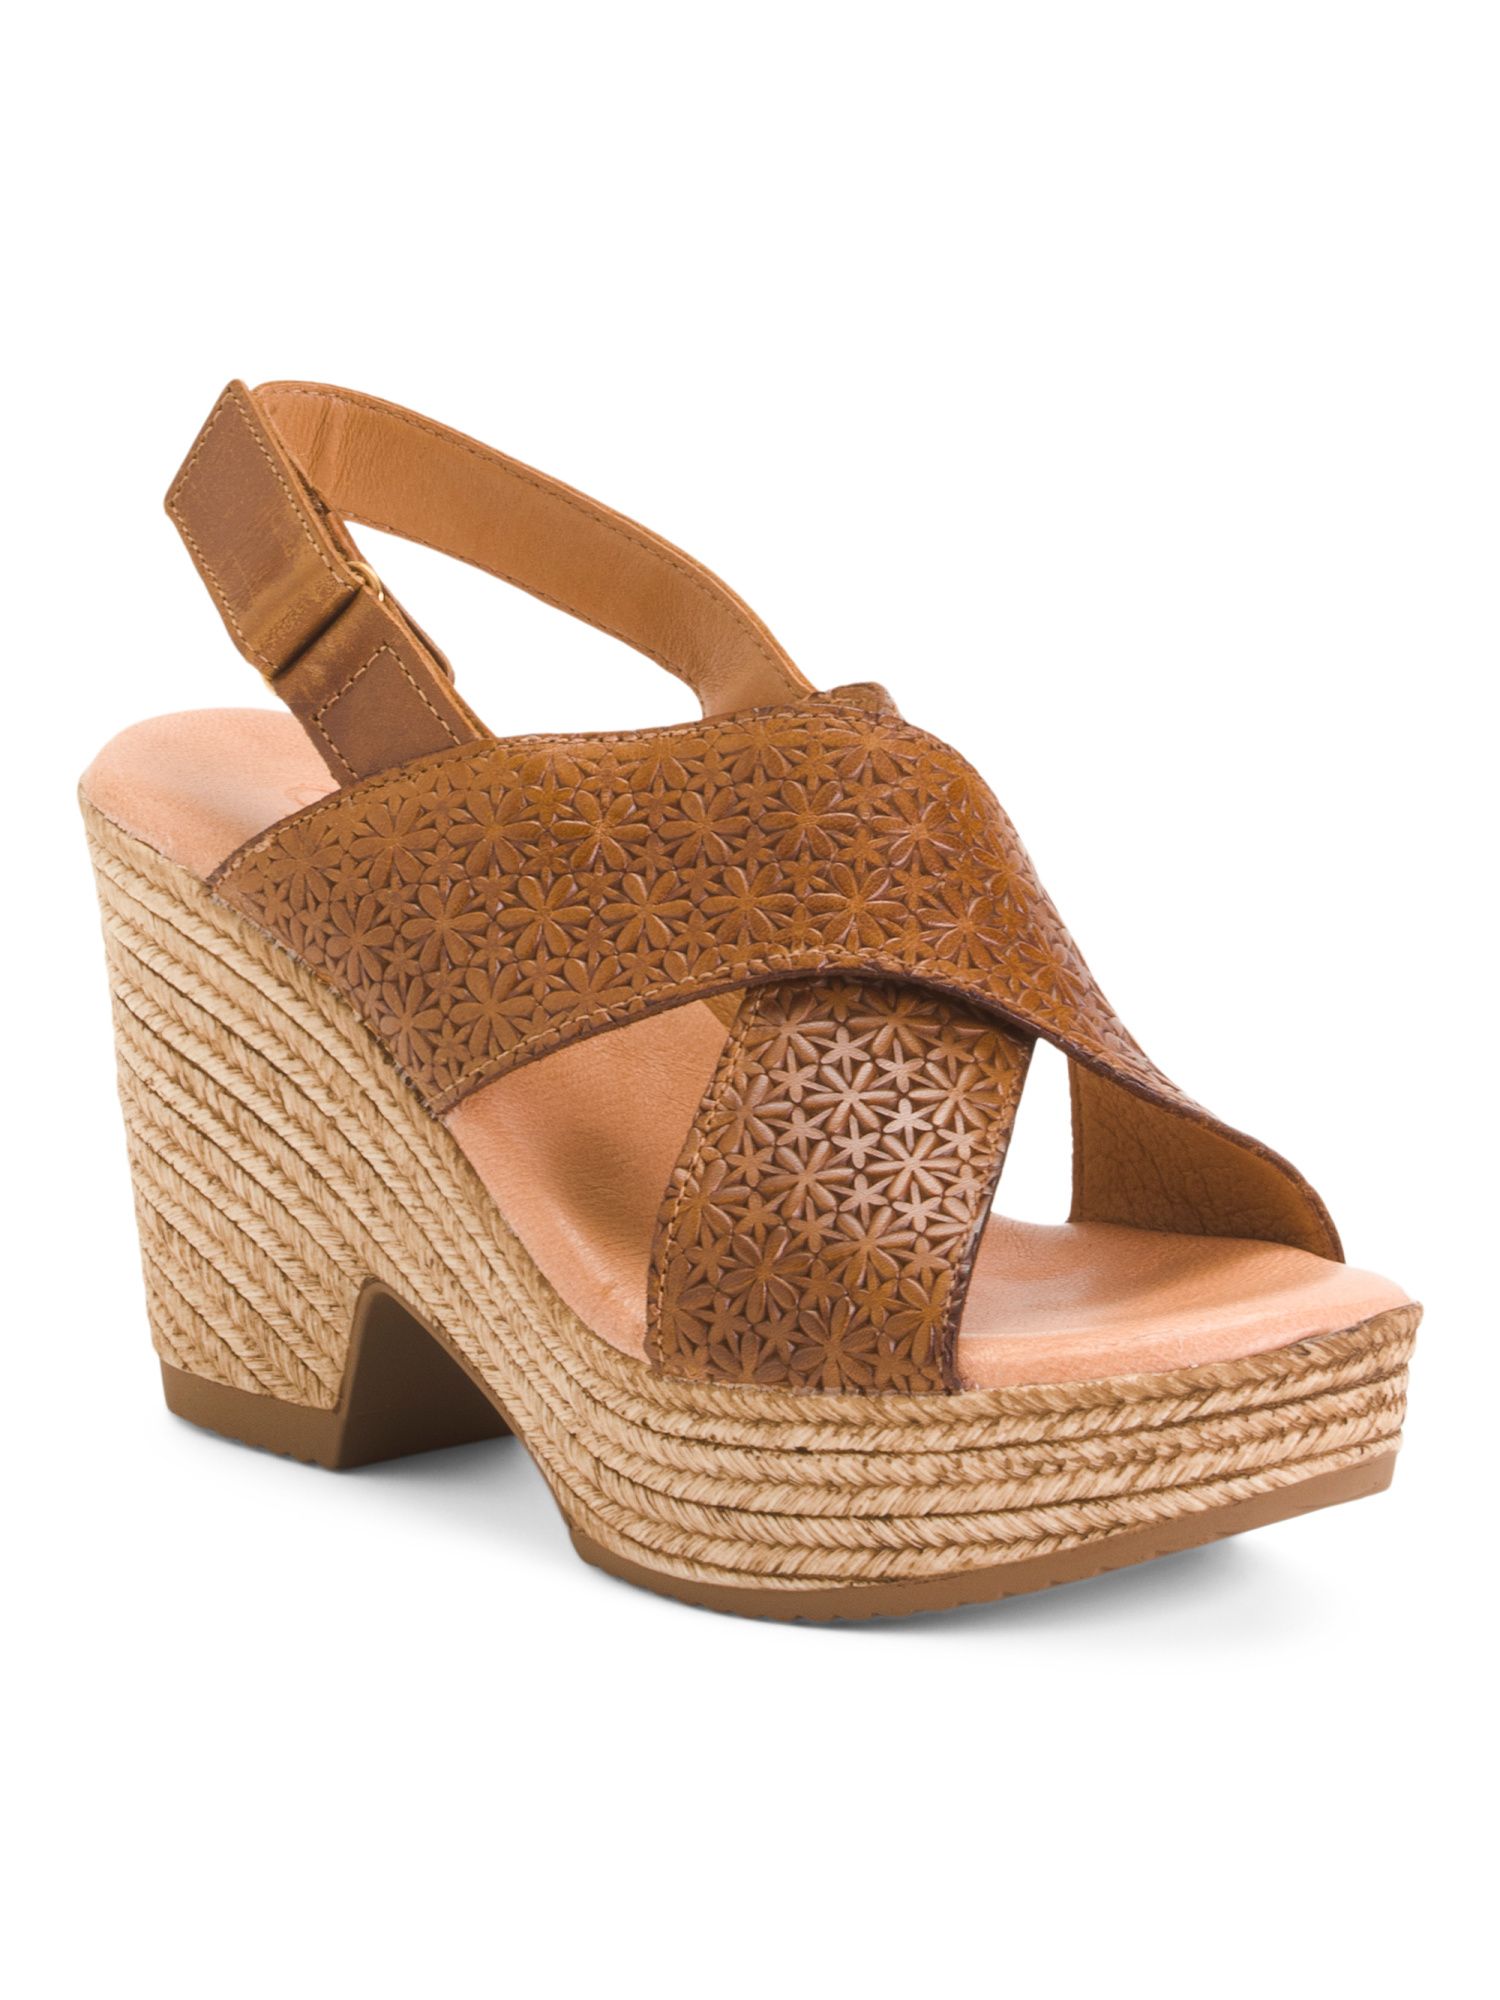 Made In Portugal Leather Wedge Espadrilles | TJ Maxx